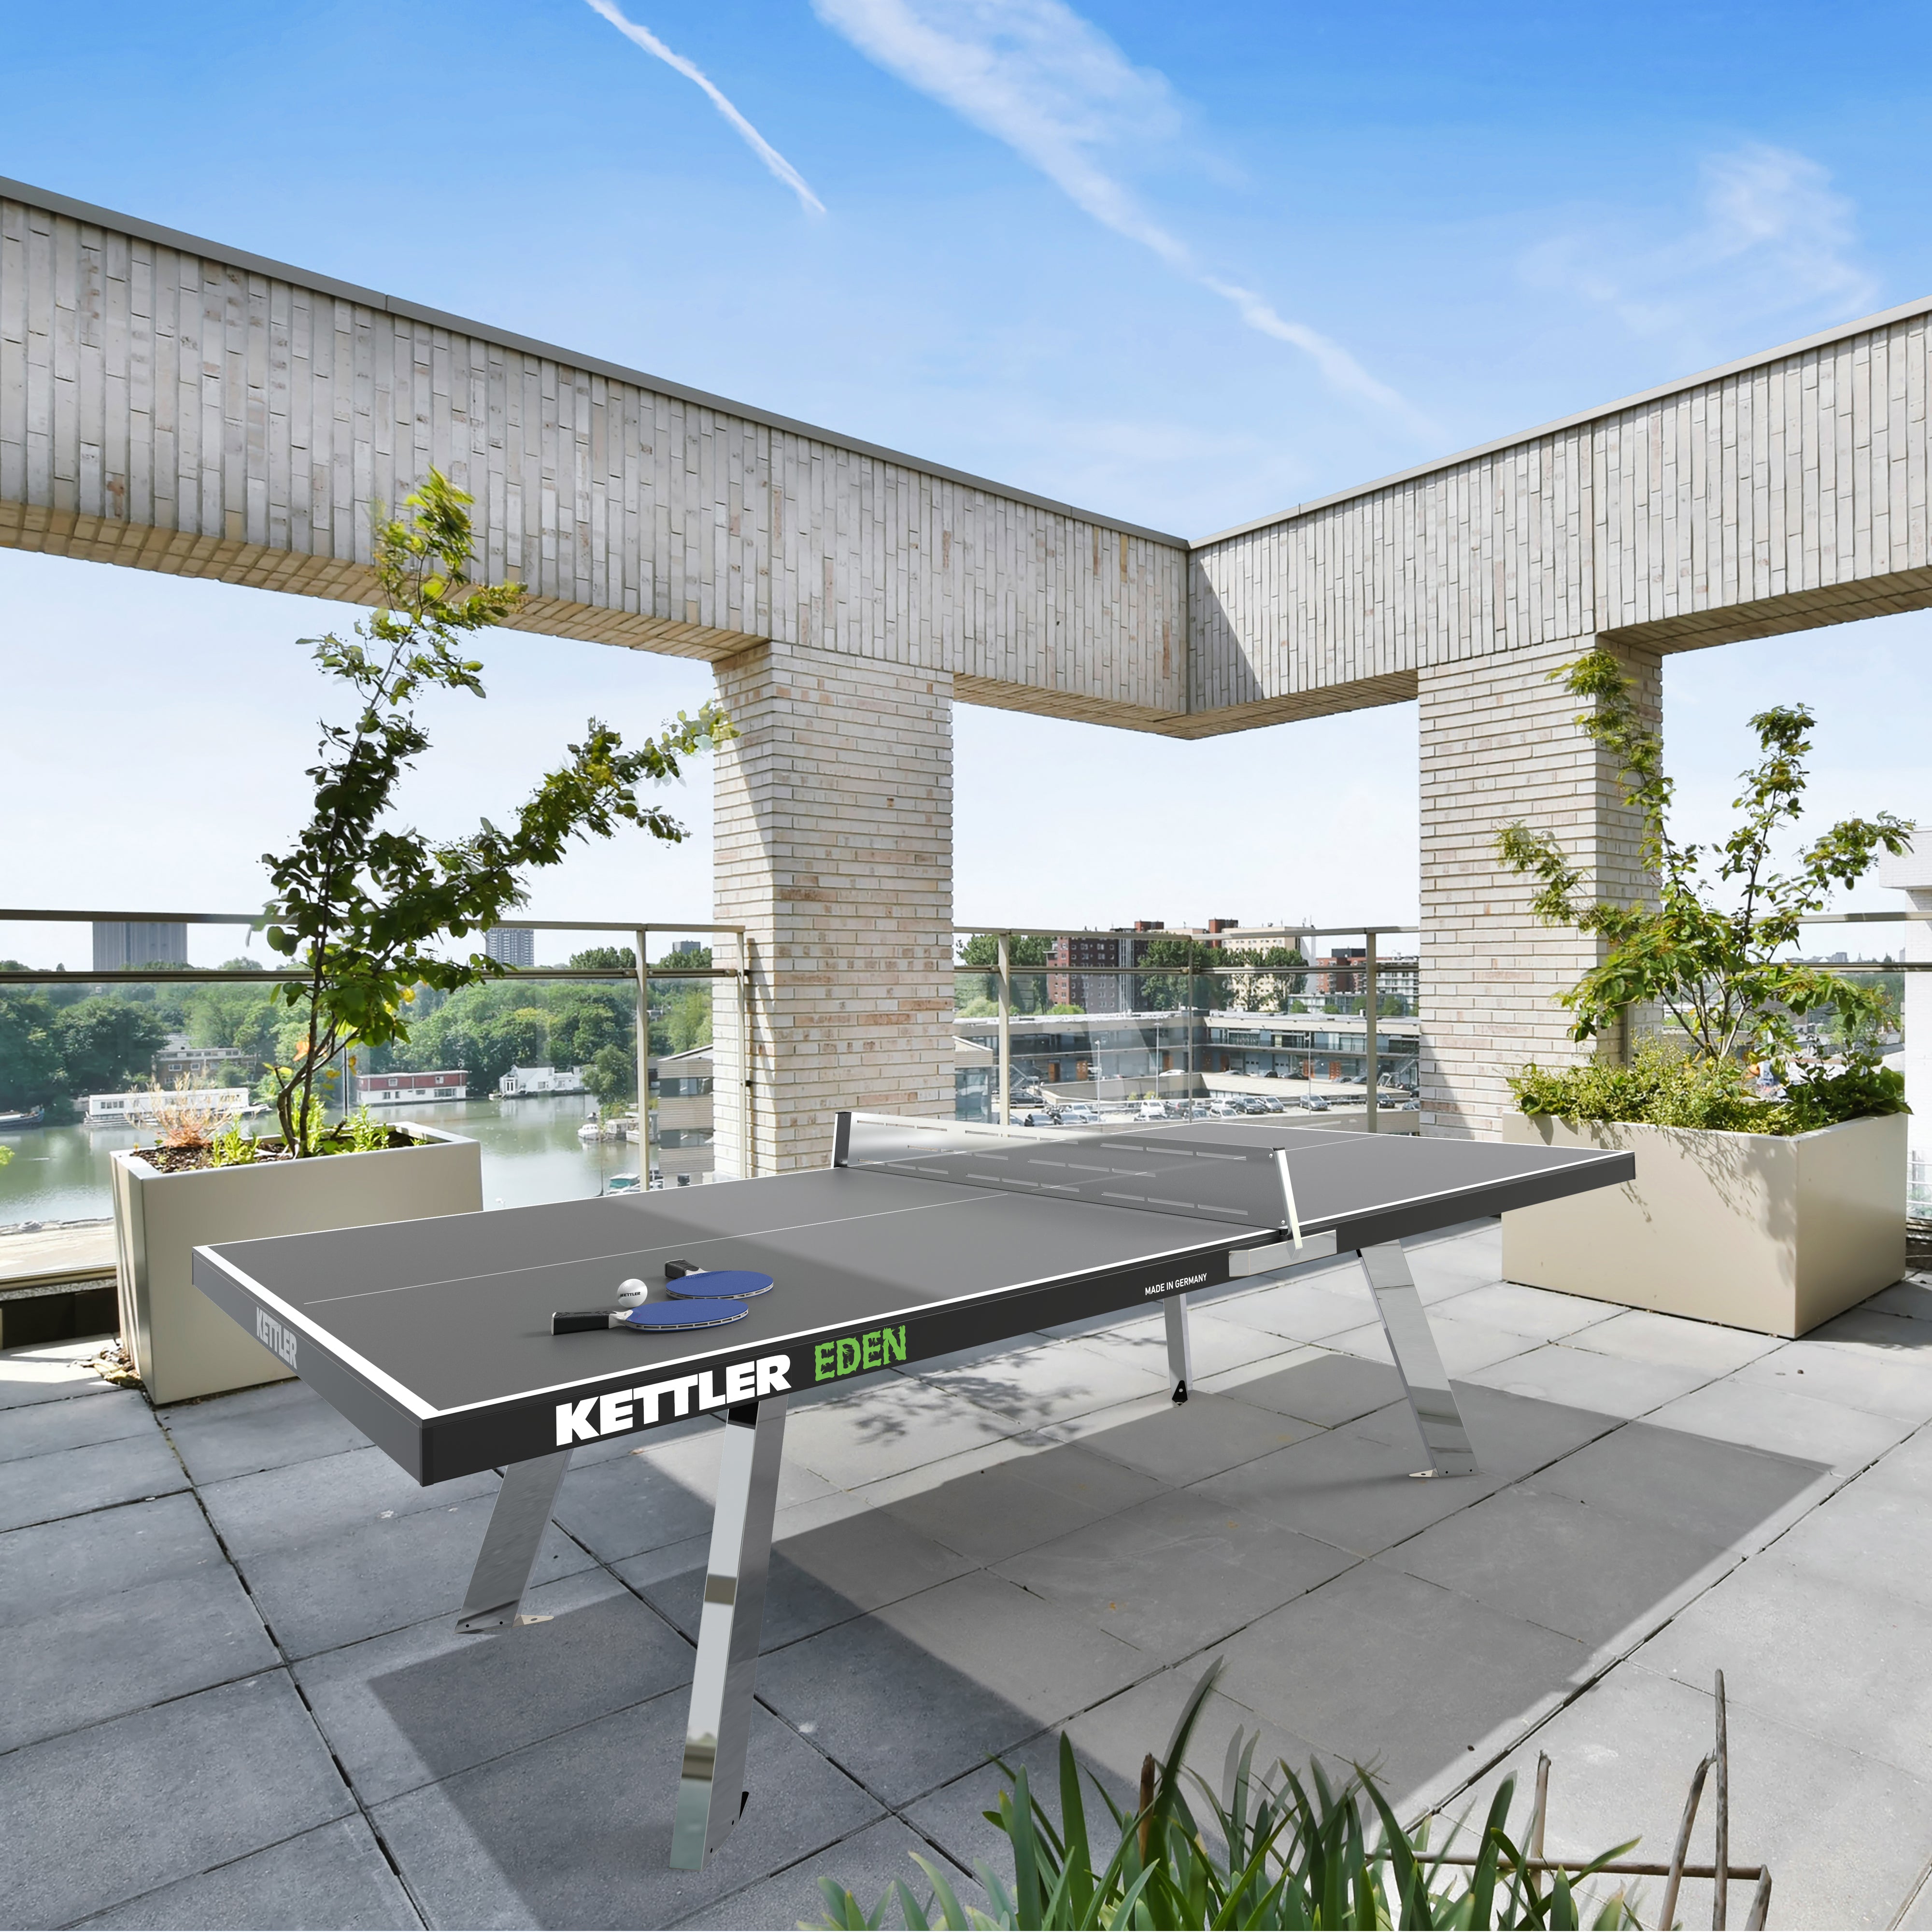 Stationary outdoor game table in commercial roof top setting